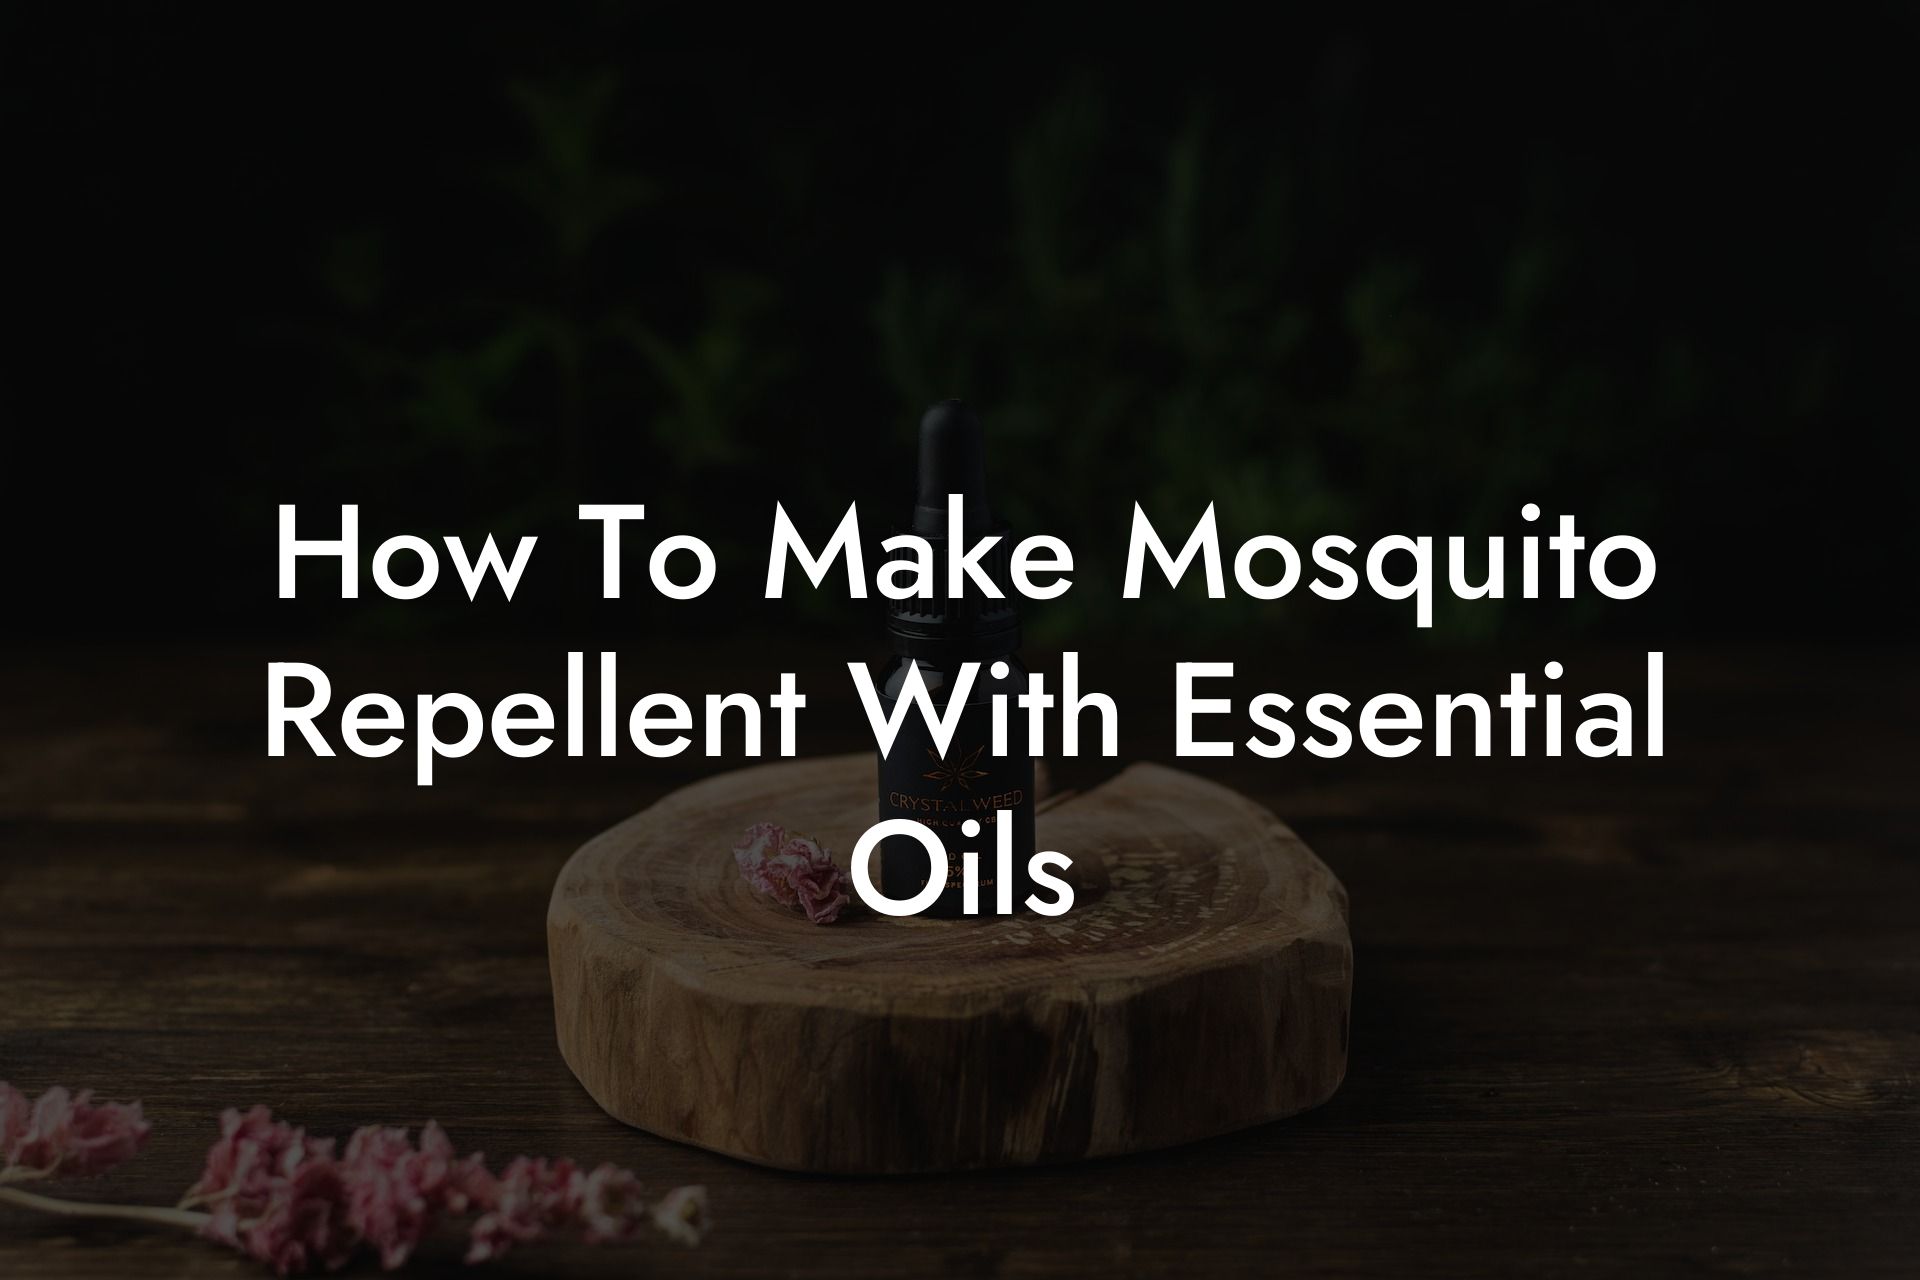 How To Make Mosquito Repellent With Essential Oils